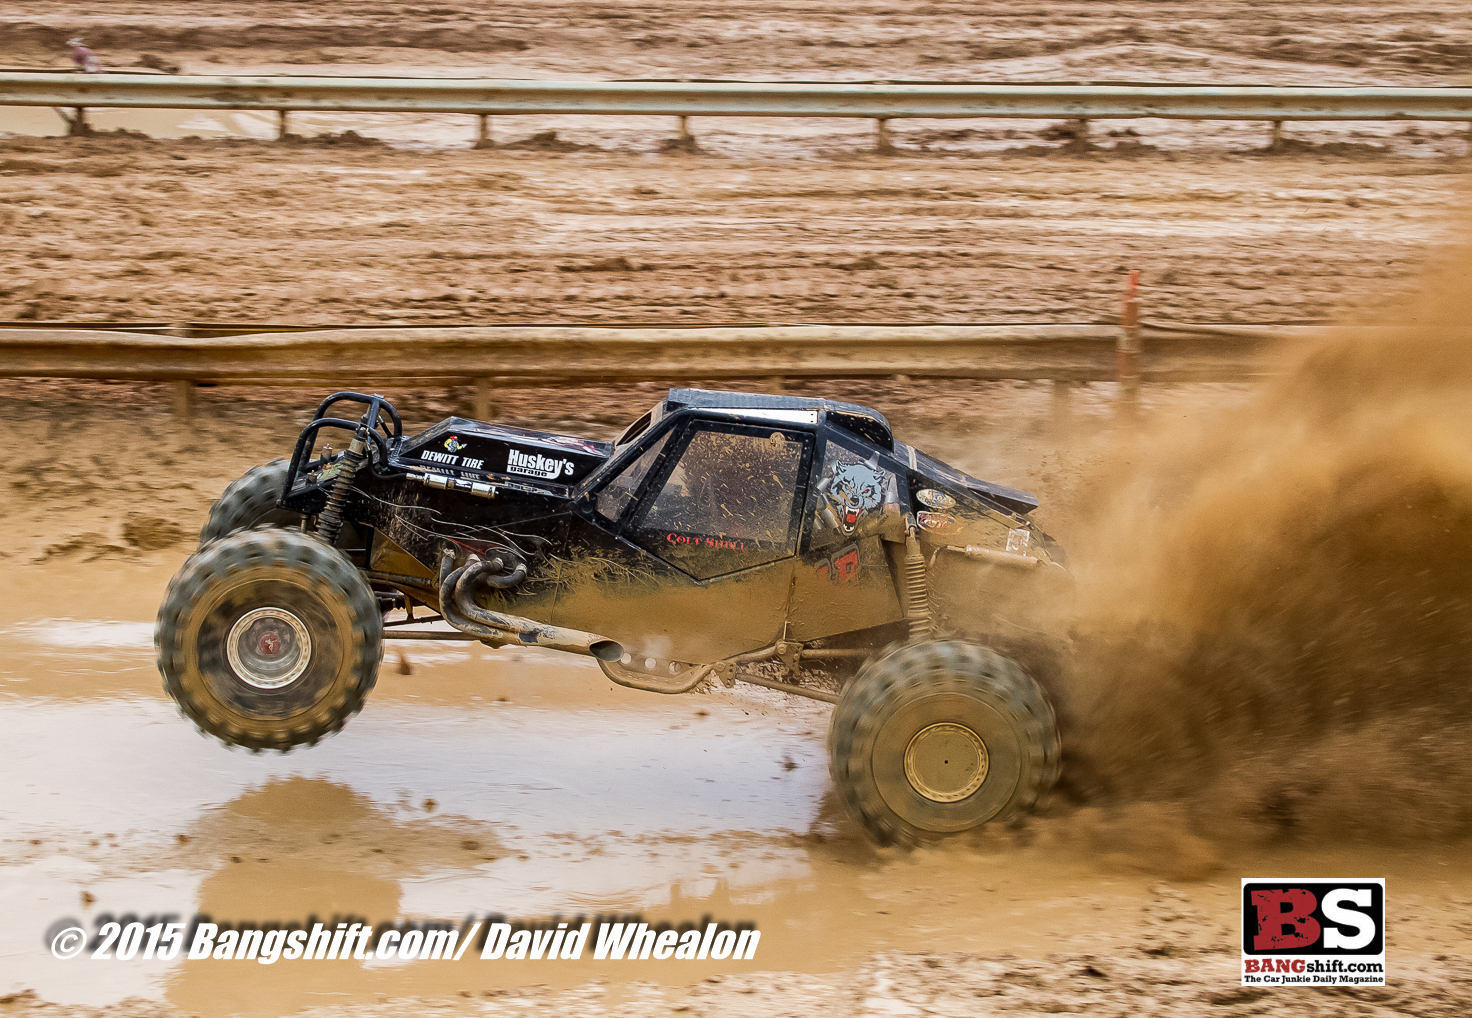 Mud Bog Action Photos: Fastest of the Fast Challenge At The Lee County Mud Motorsports Park